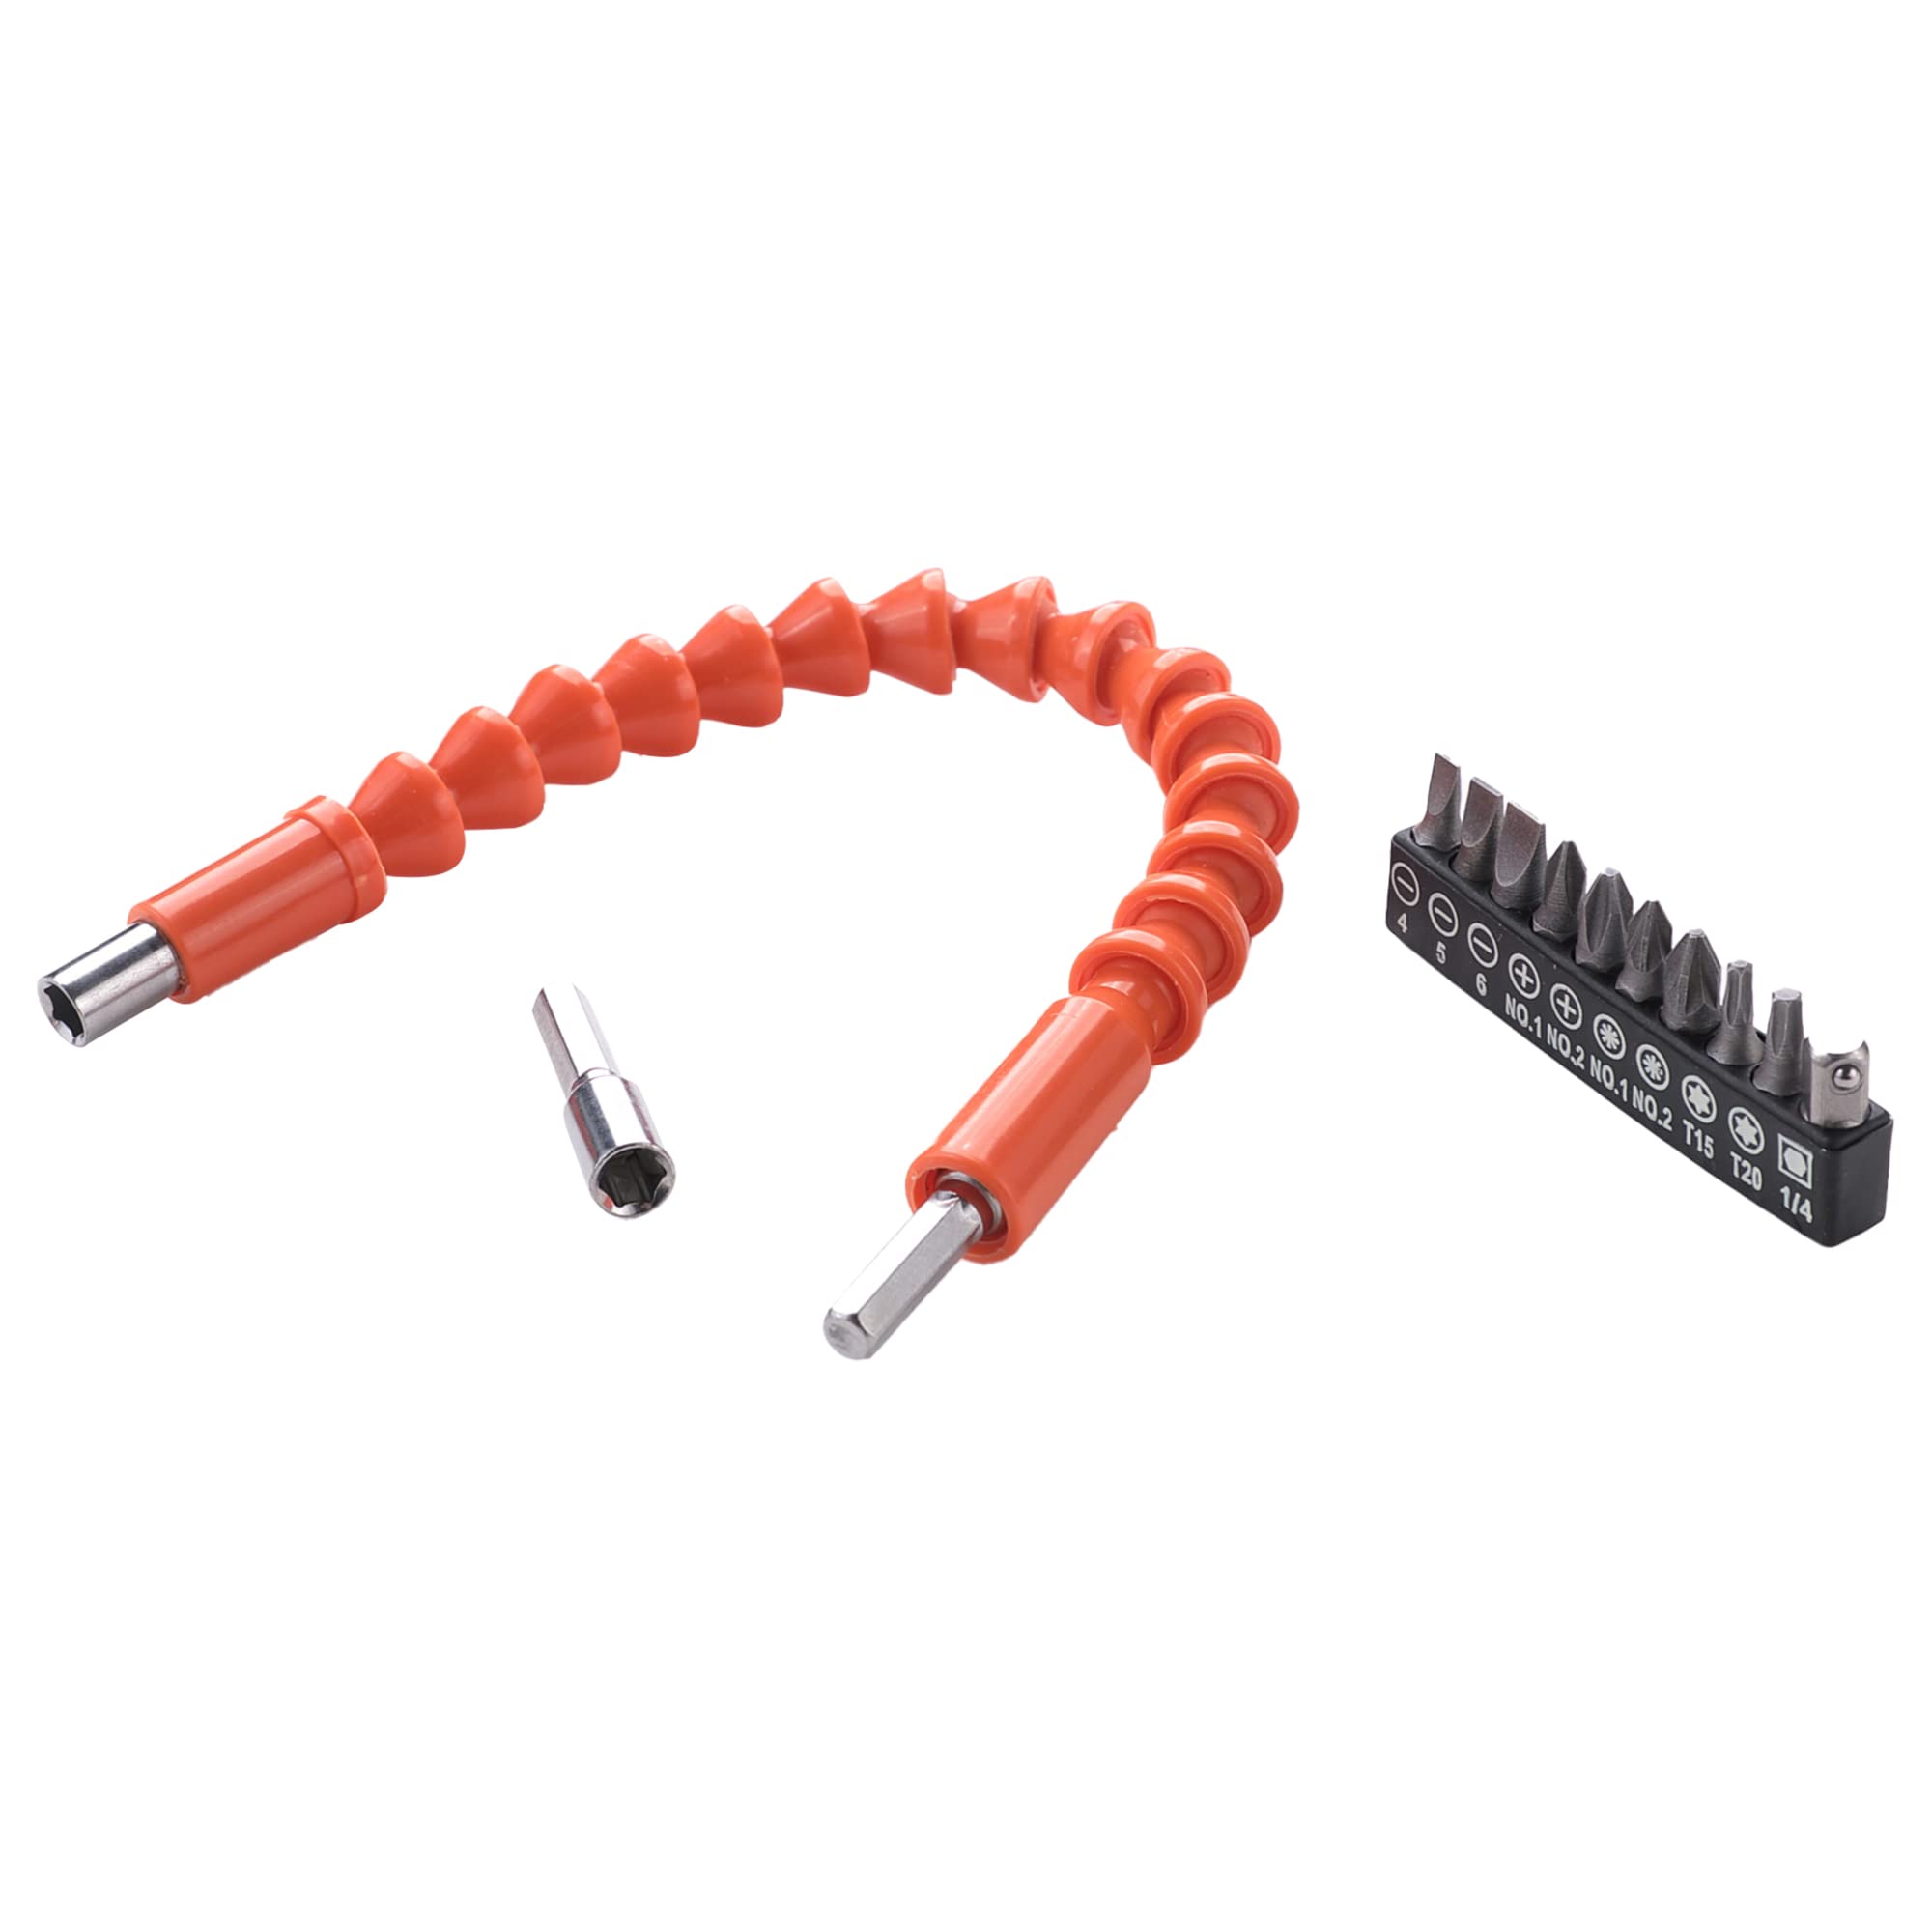 Cheston Flexible Drill Bit Extension Shaft with Screwdriver Bits